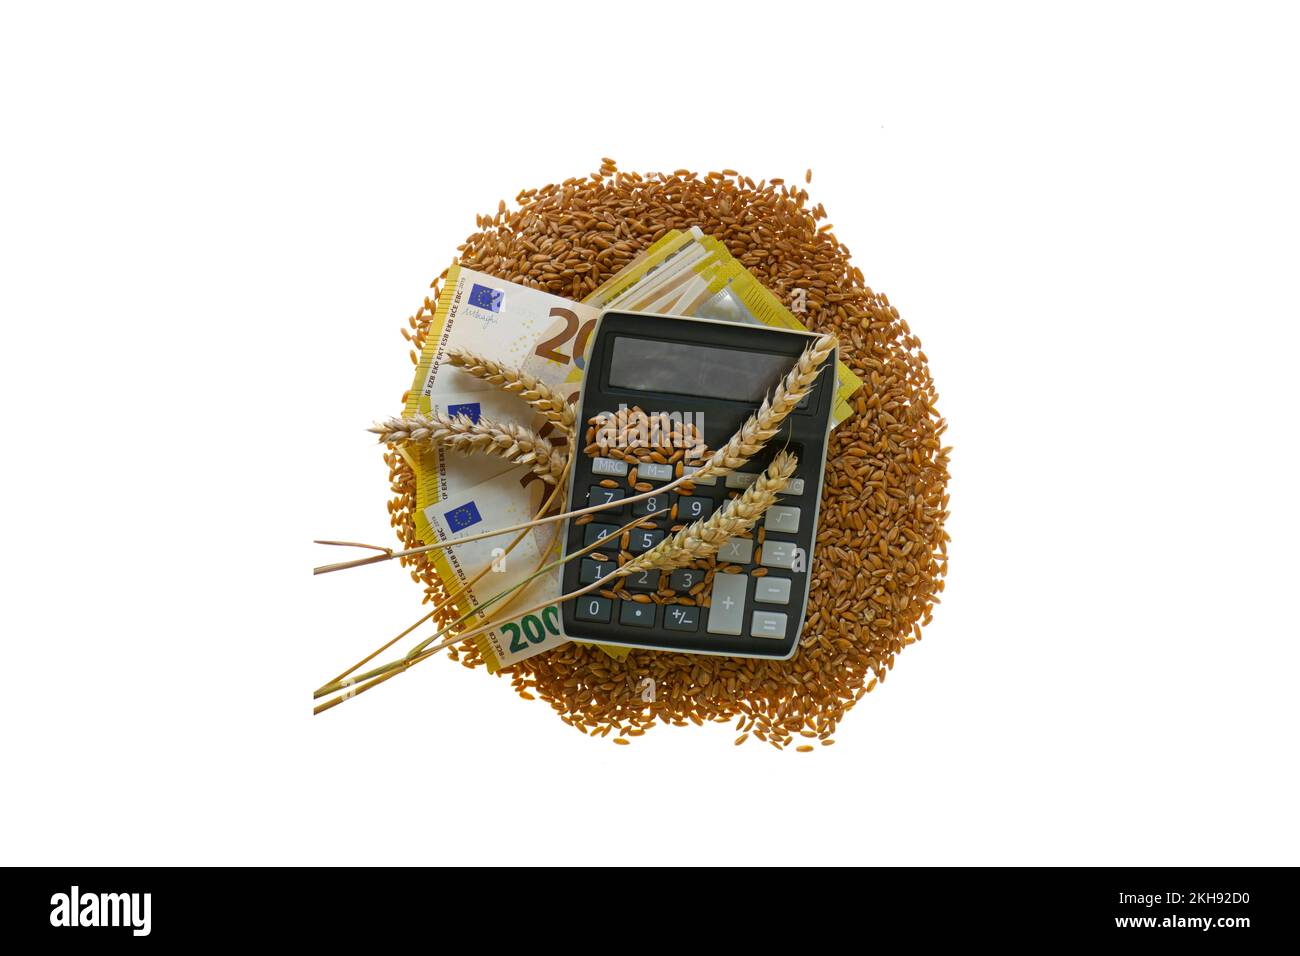 Sale wheat concept. Wheat prices. Wheat grains, euro banknotes and a calculator on a white background.Food crisis. Growth in world prices for wheat Stock Photo